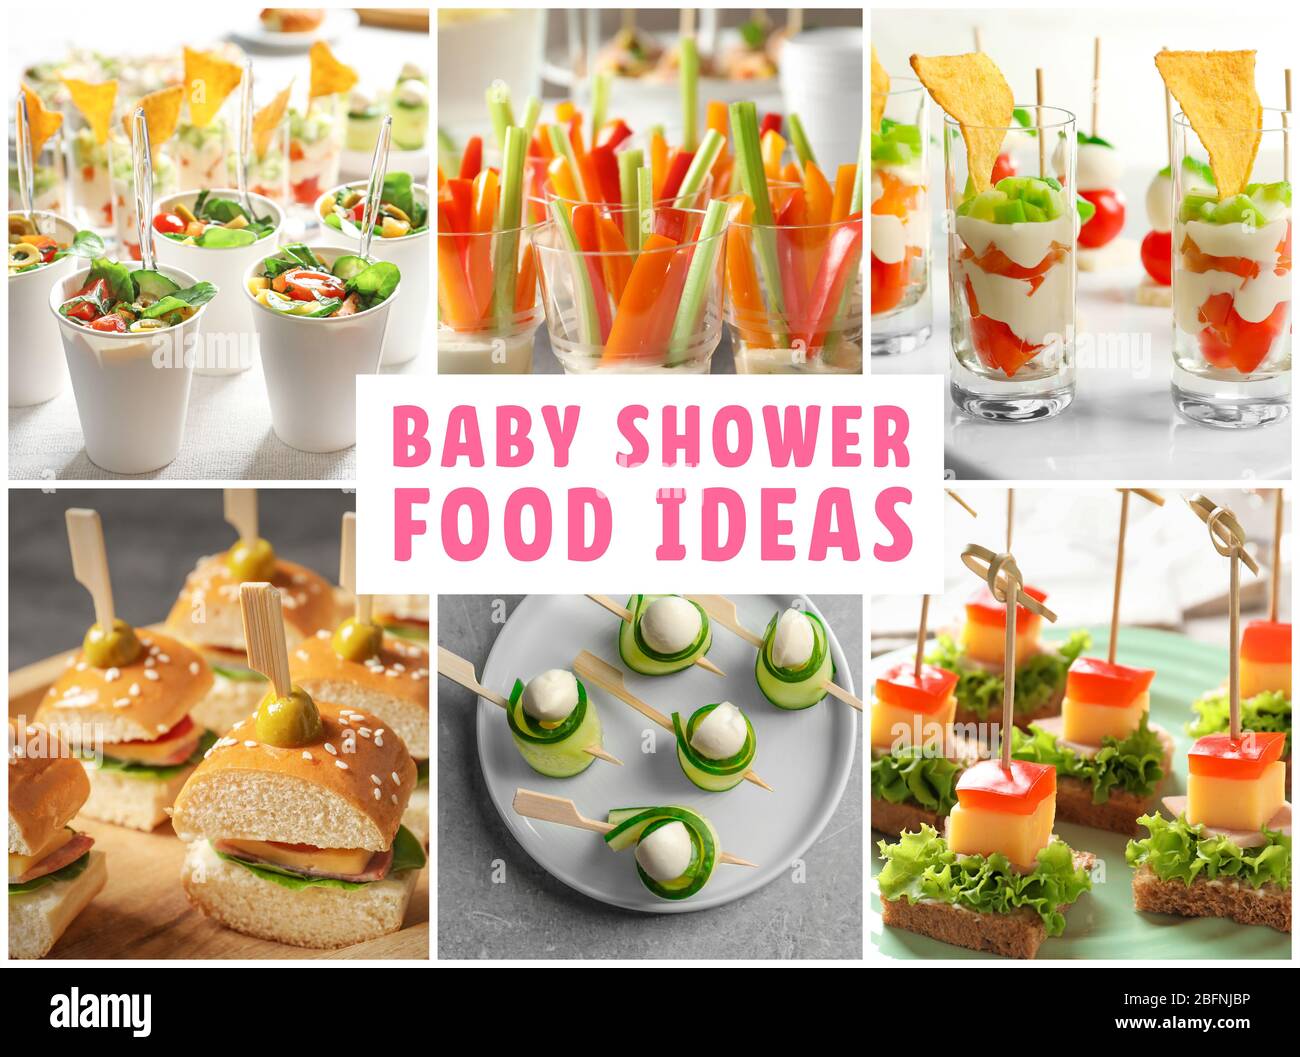 Collage with baby shower food ideas Stock Photo - Alamy